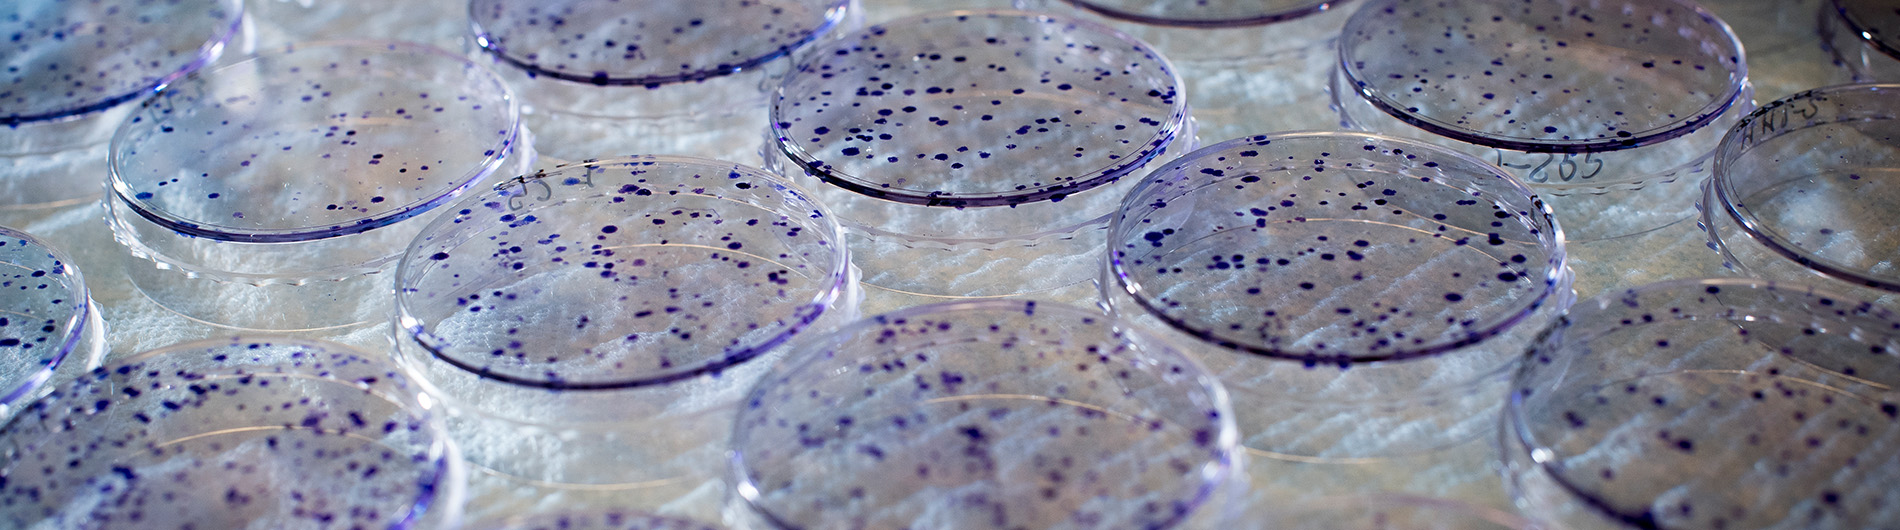 Close-up of bacteria growing on Petri dish in Eddy Yang's Laboratory inside the Hazelrig Salter Radiation Oncology Center, 2019.